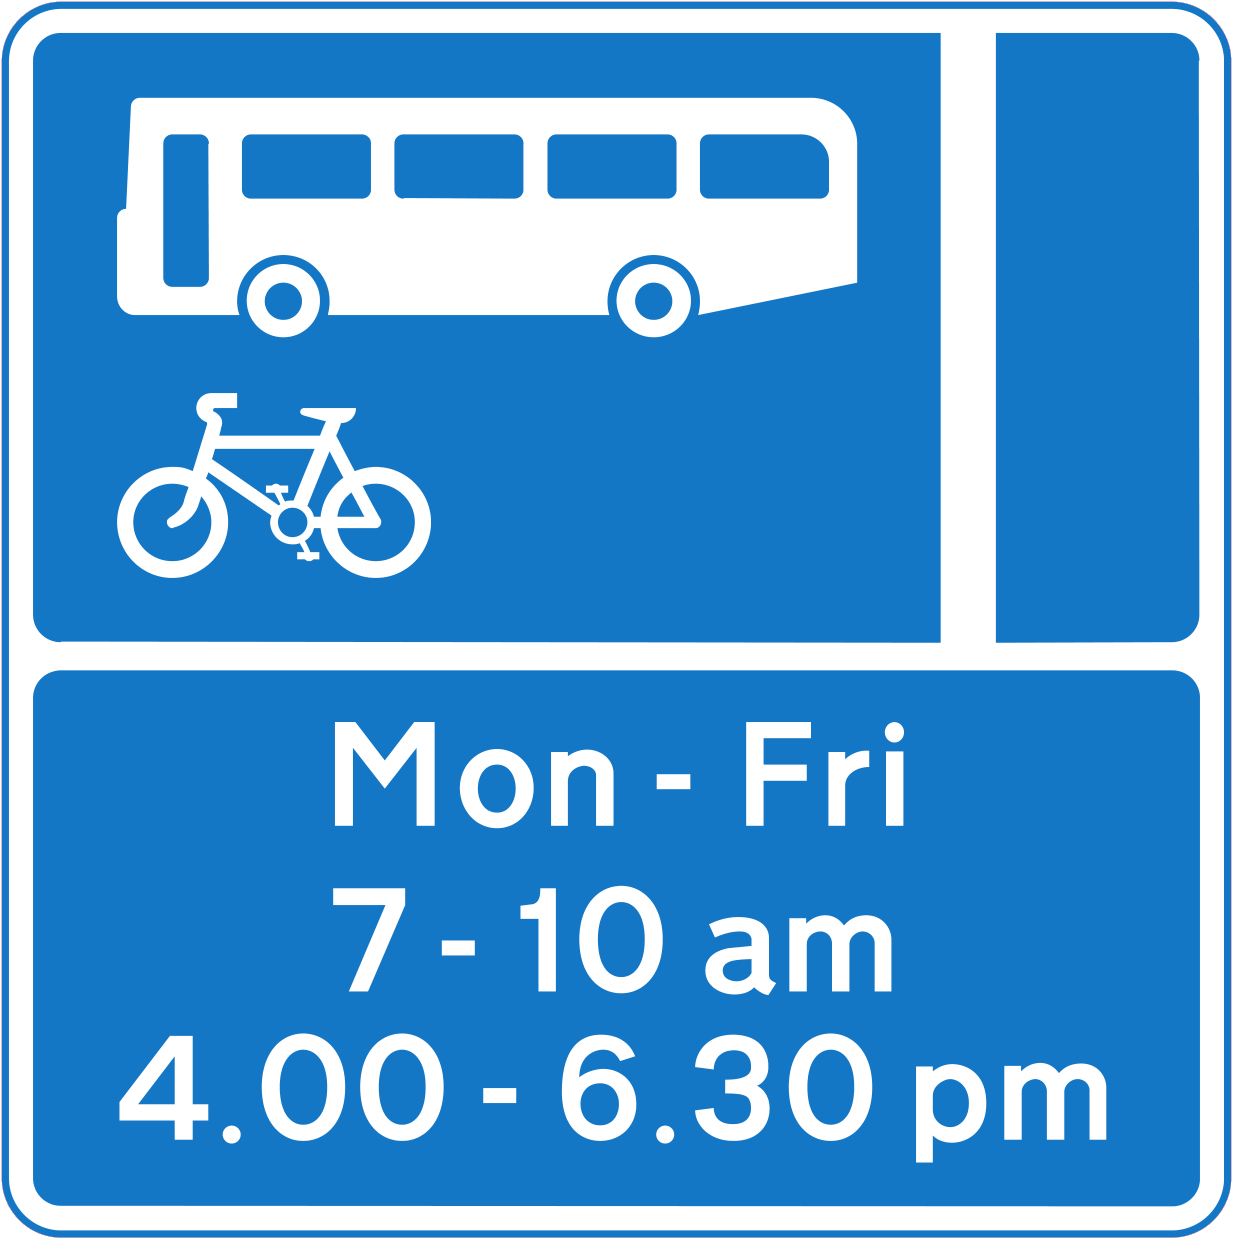 Bus and Cycle Lane Road Sign